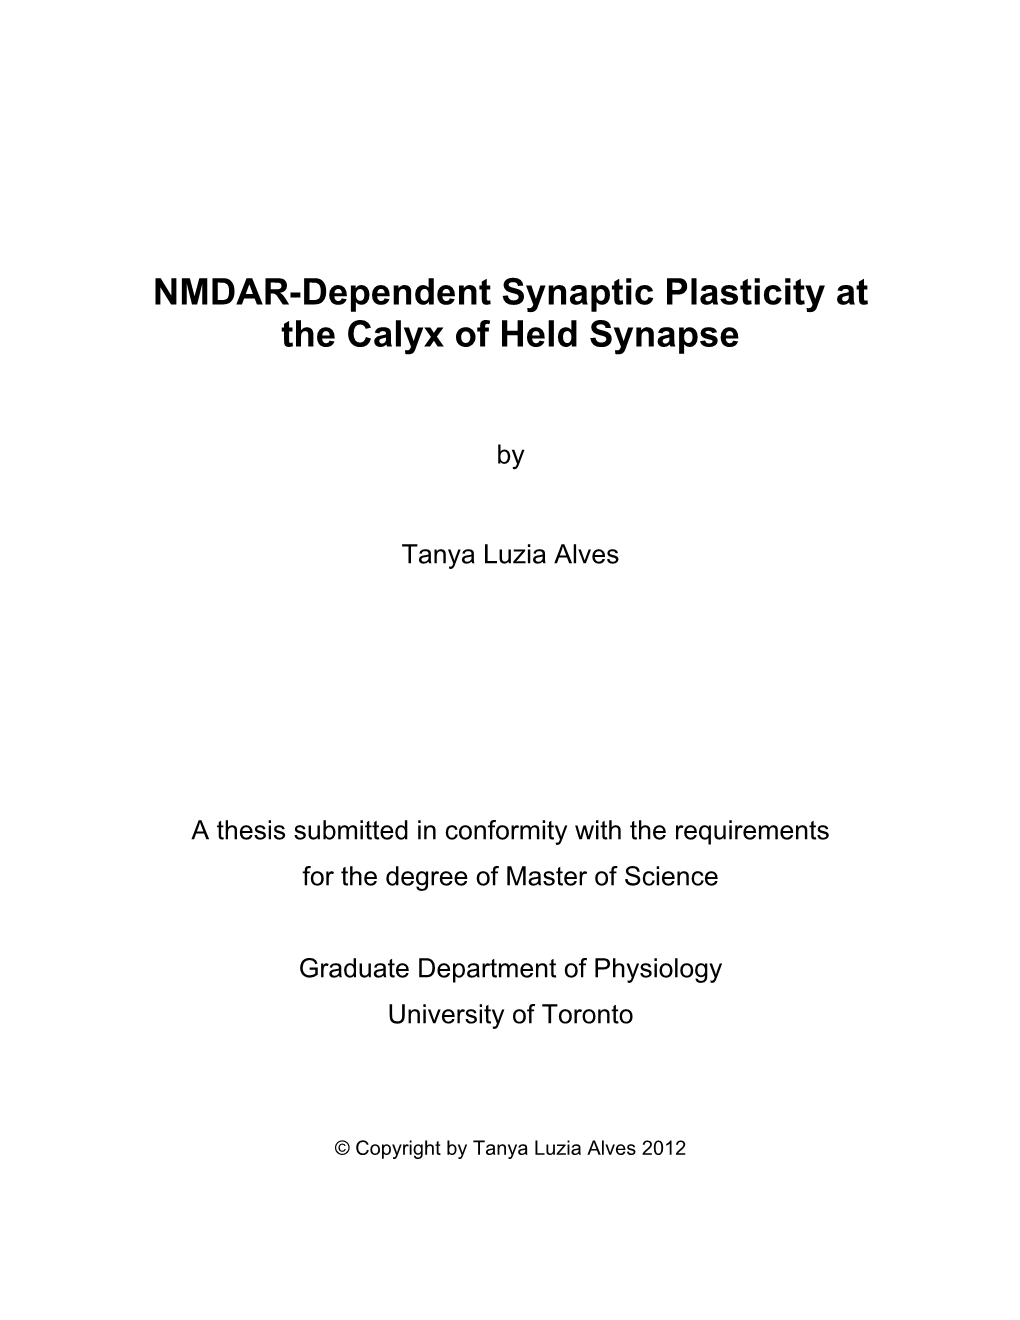 NMDAR-Dependent Synaptic Plasticity at the Calyx of Held Synapse